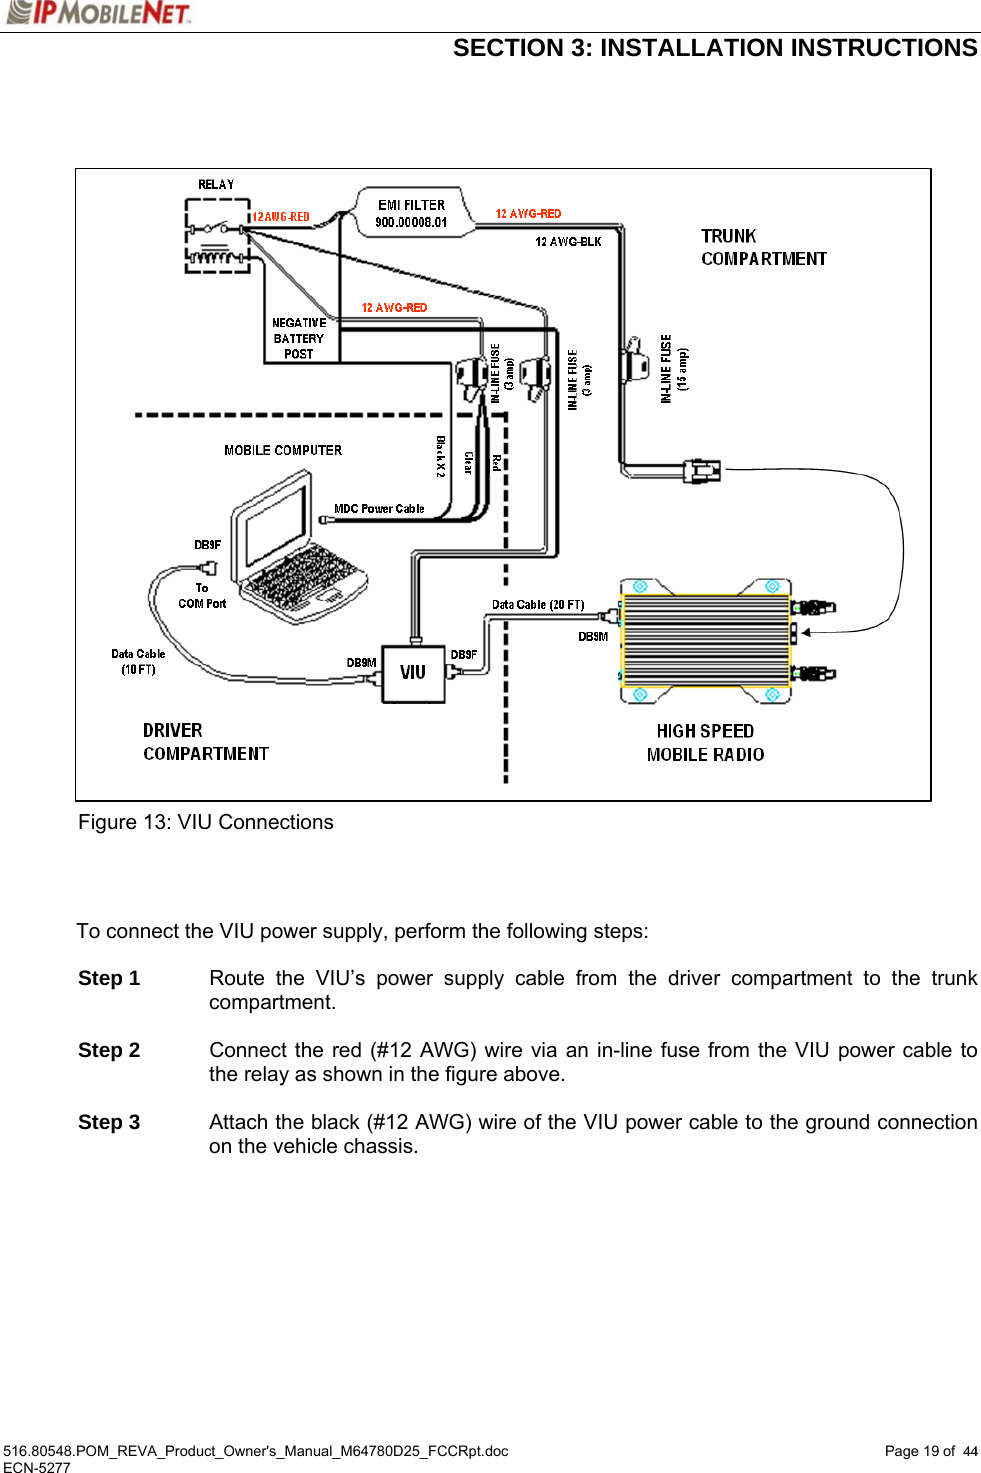  SECTION 3: INSTALLATION INSTRUCTIONS  516.80548.POM_REVA_Product_Owner&apos;s_Manual_M64780D25_FCCRpt.doc Page 19 of  44 ECN-5277  44                      Figure 13: VIU Connections    To connect the VIU power supply, perform the following steps:   Step 1  Route the VIU’s power supply cable from the driver compartment to the trunk compartment.   Step 2  Connect the red (#12 AWG) wire via an in-line fuse from the VIU power cable to the relay as shown in the figure above.   Step 3  Attach the black (#12 AWG) wire of the VIU power cable to the ground connection on the vehicle chassis.   